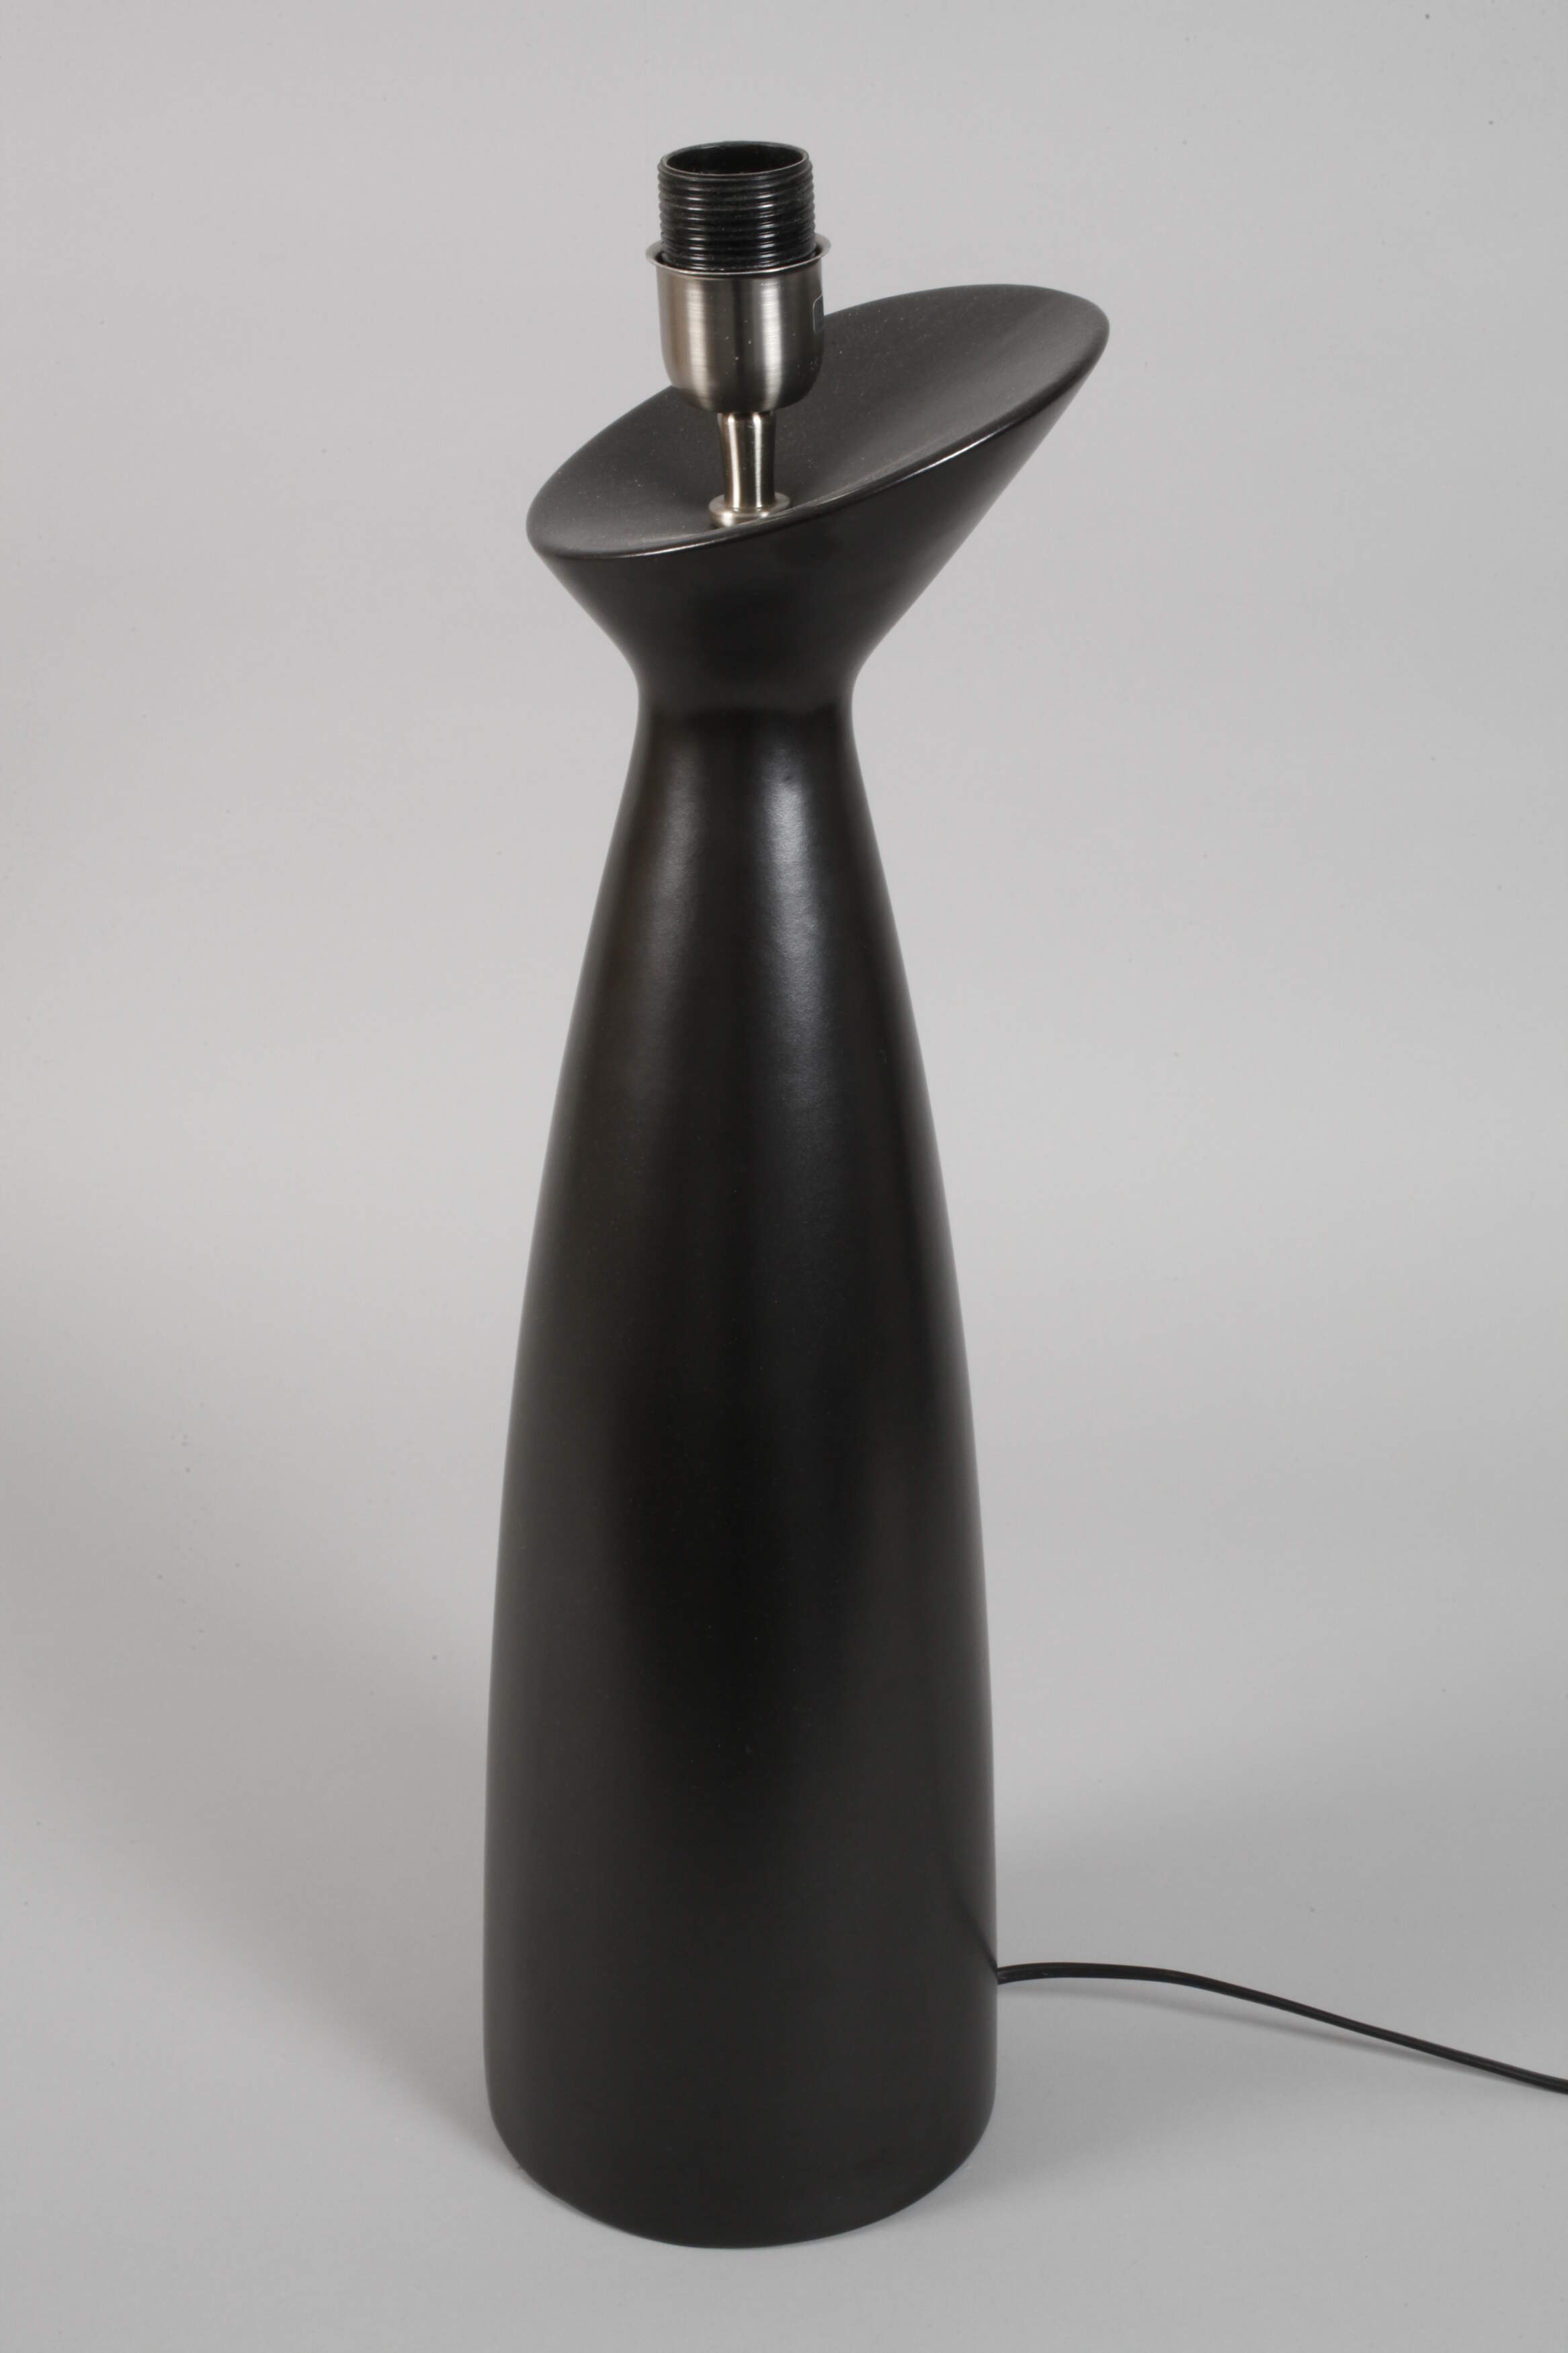 Table lamp Louis Drimmer - Image 2 of 4